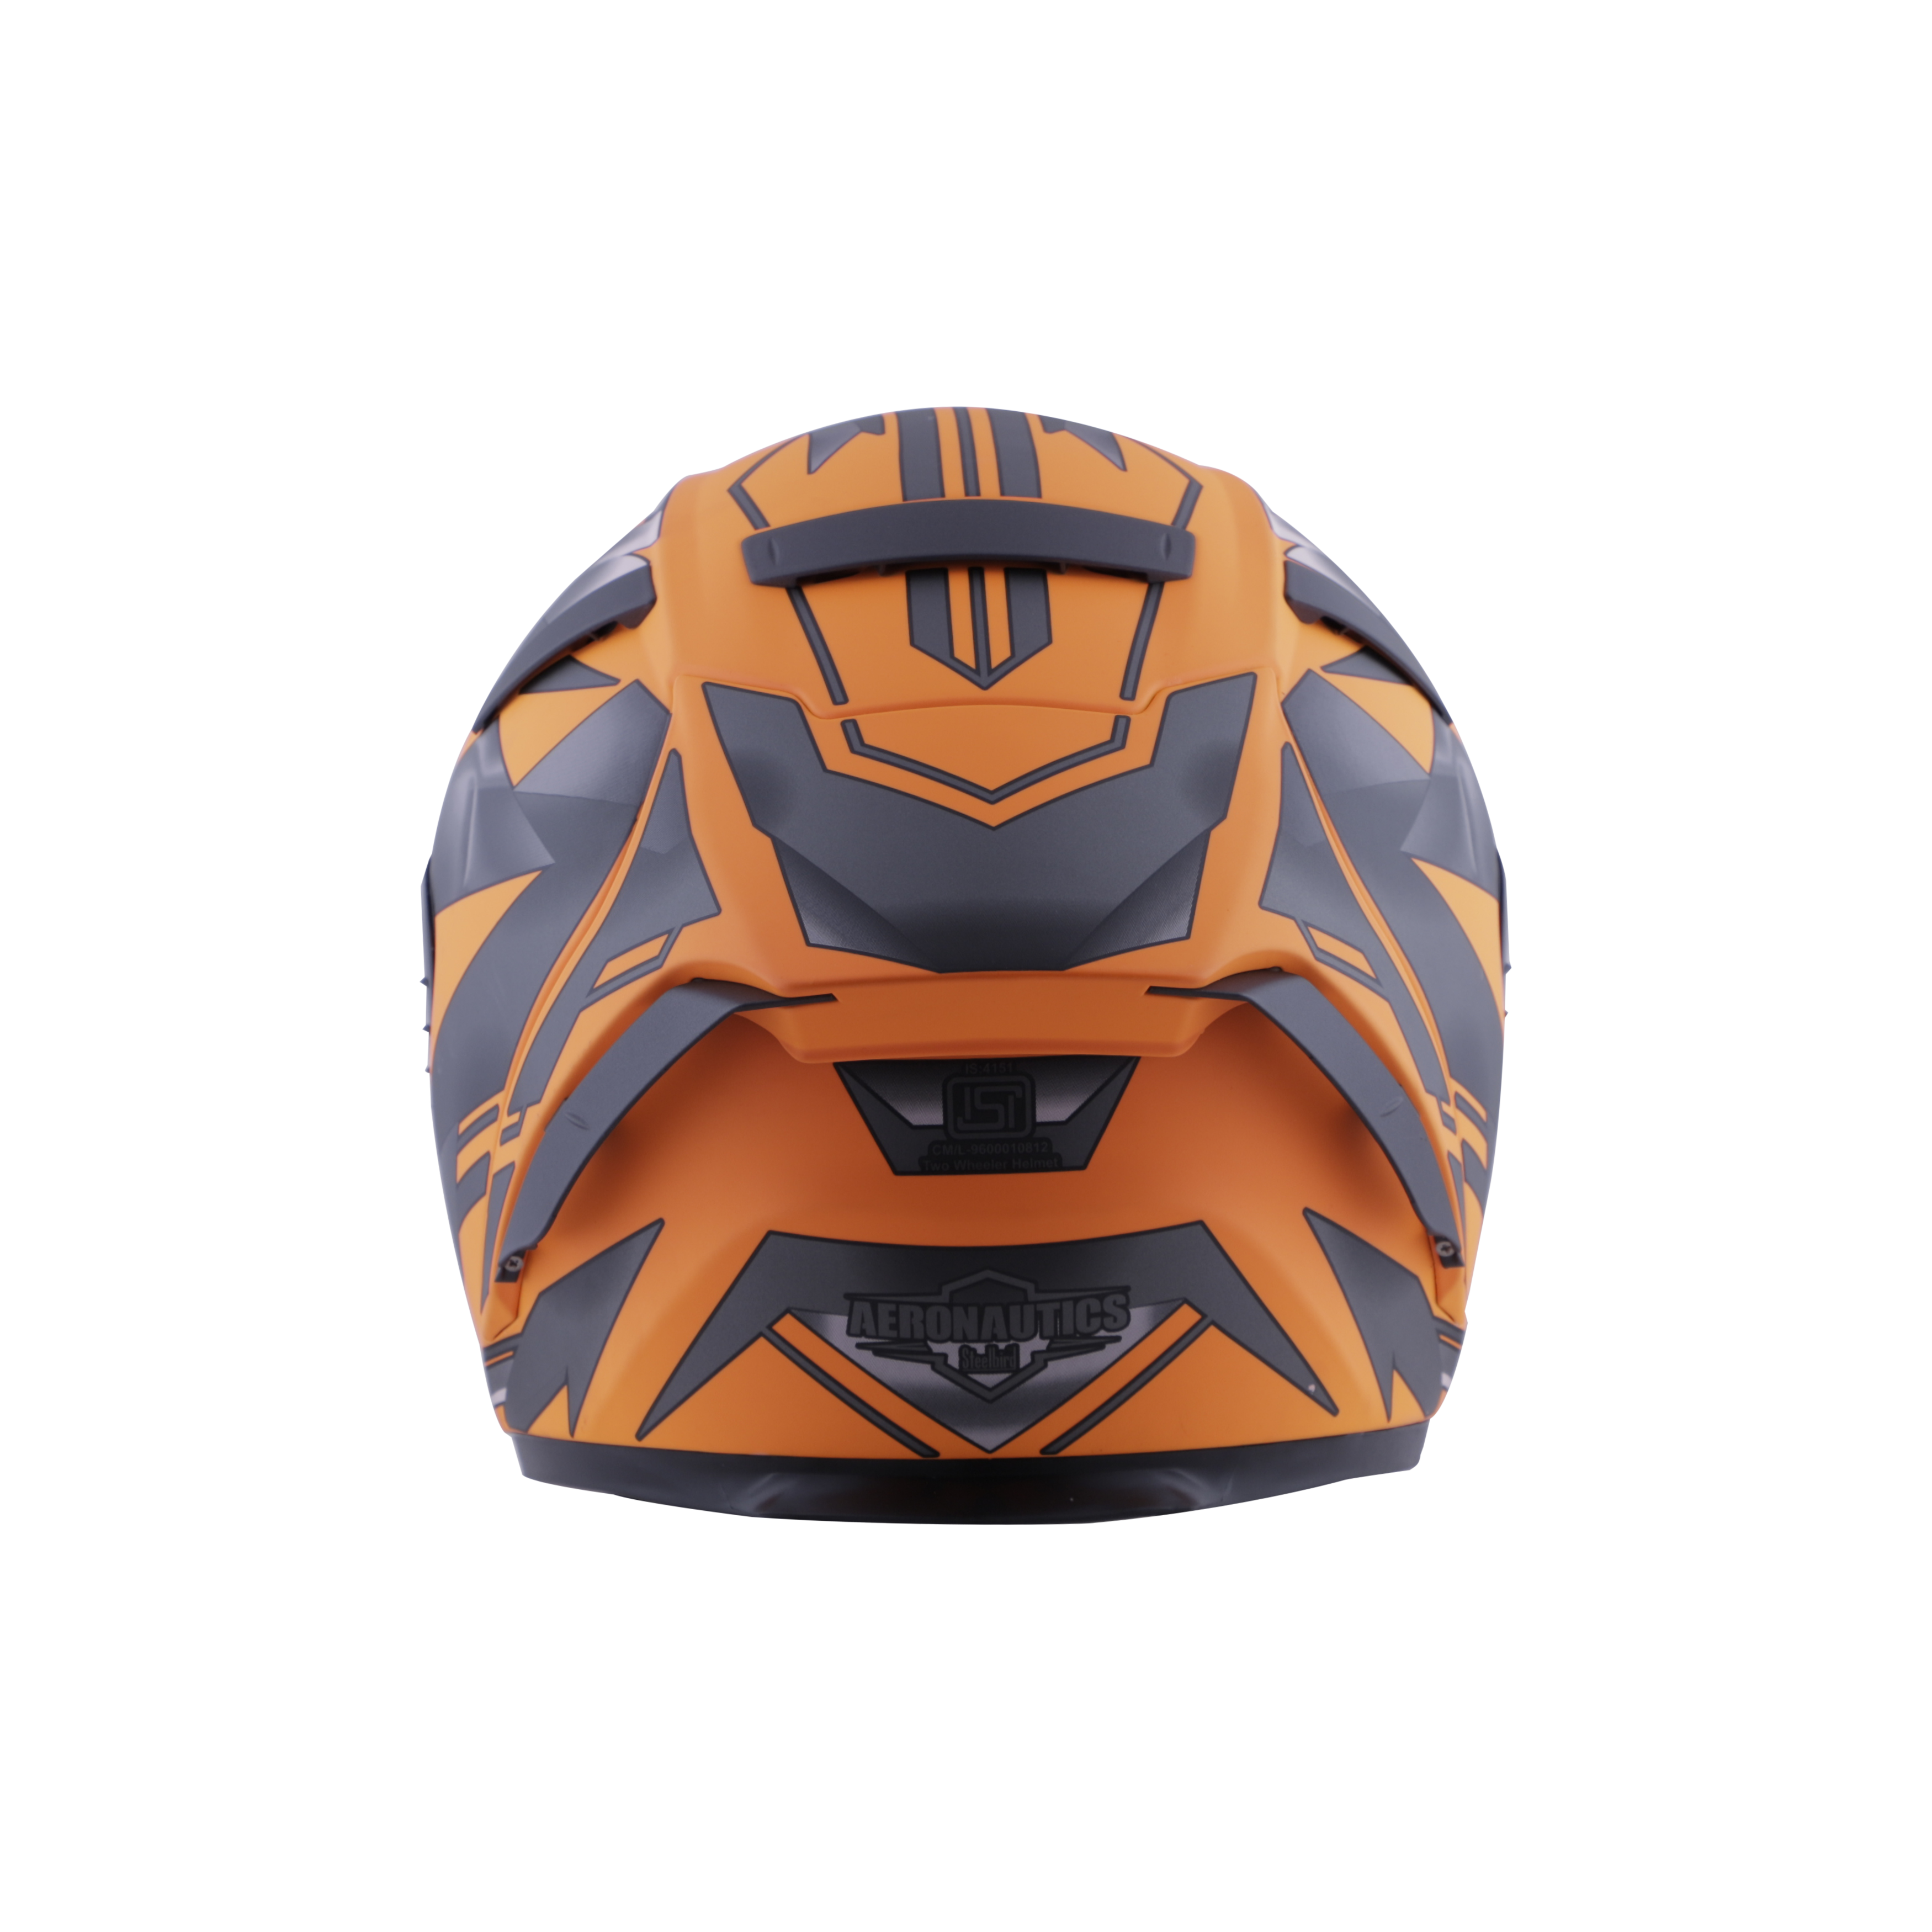 SA-2 METALLIC GLOSSY FLUO ORANGE WITH GREY ( FITTED WITH CLEAR VISOR  EXTRA CHROME GOLD VISOR FREE) WITH ANTI-FOG SHIELD HOLDER